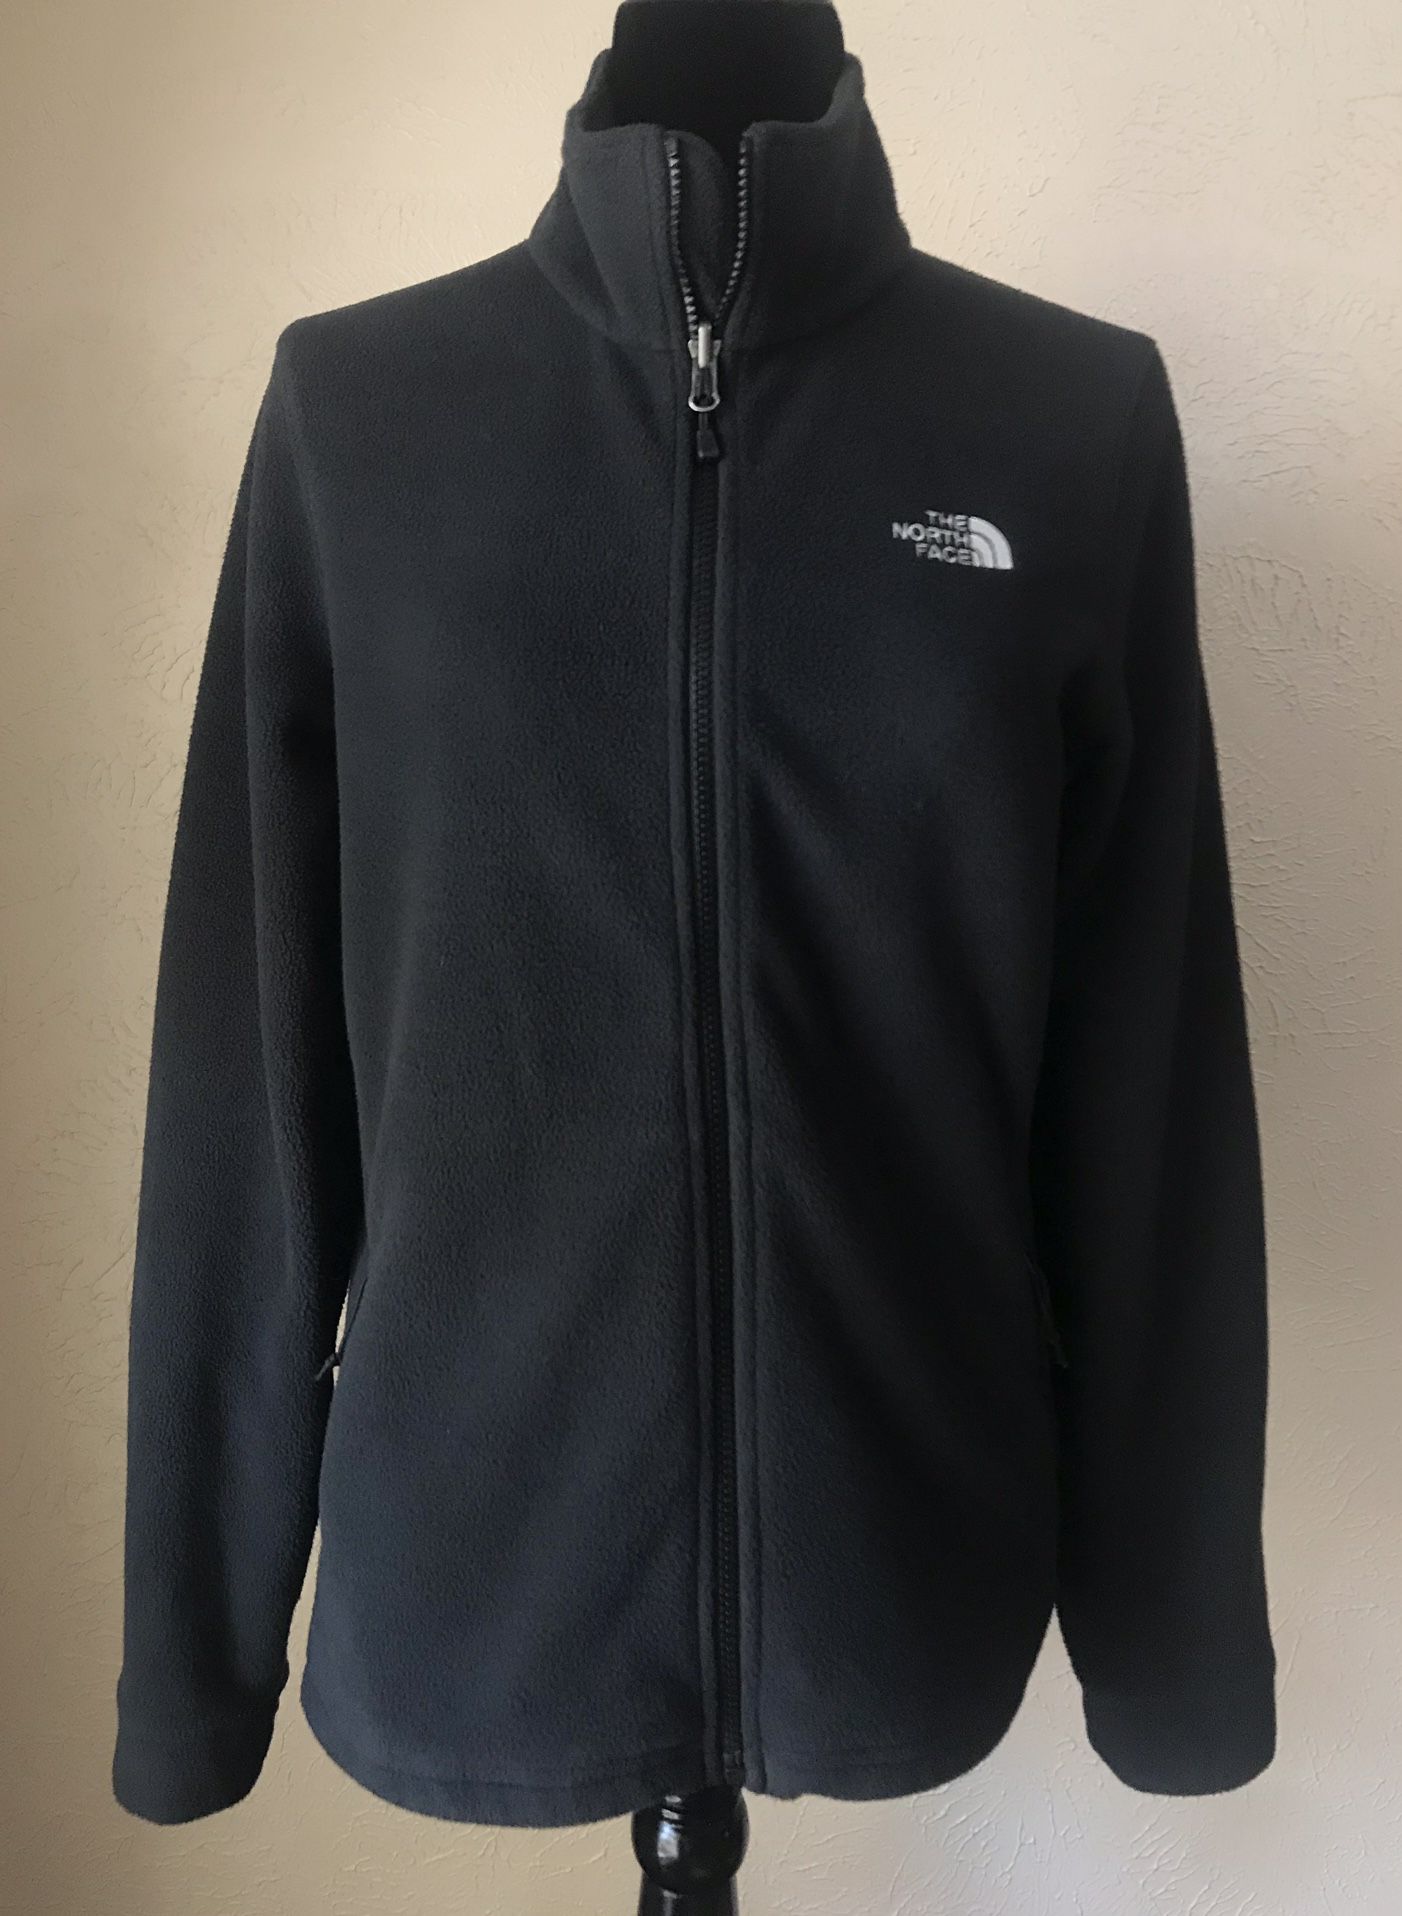 North Face Women’s Jacket Size M..(New)